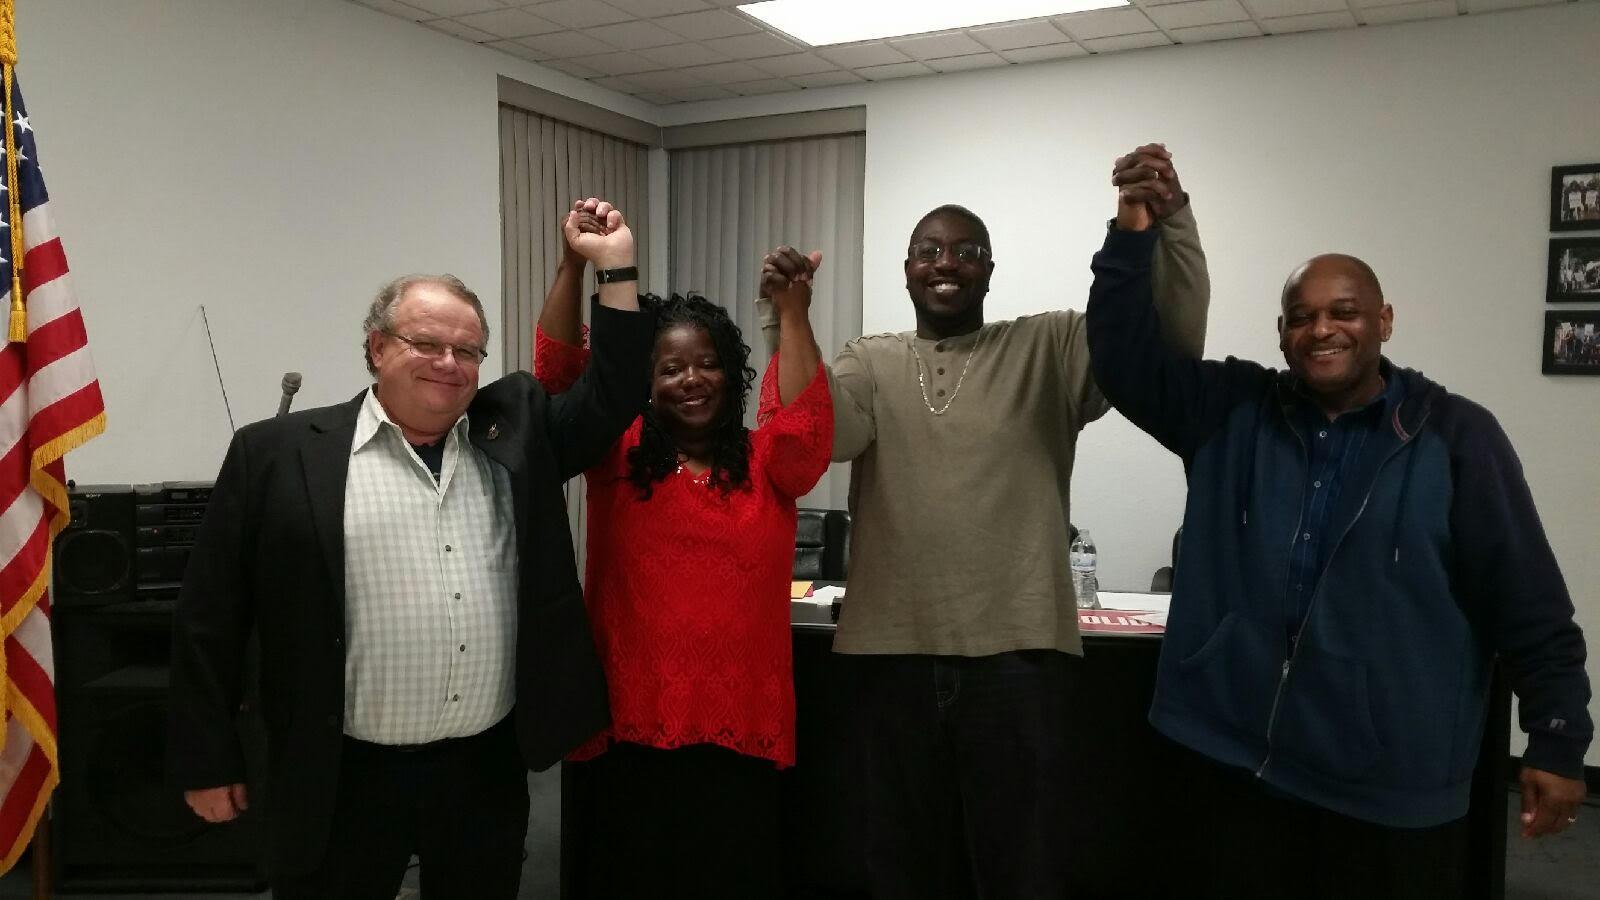 Members of Machinists Local 1584 after their strike victory